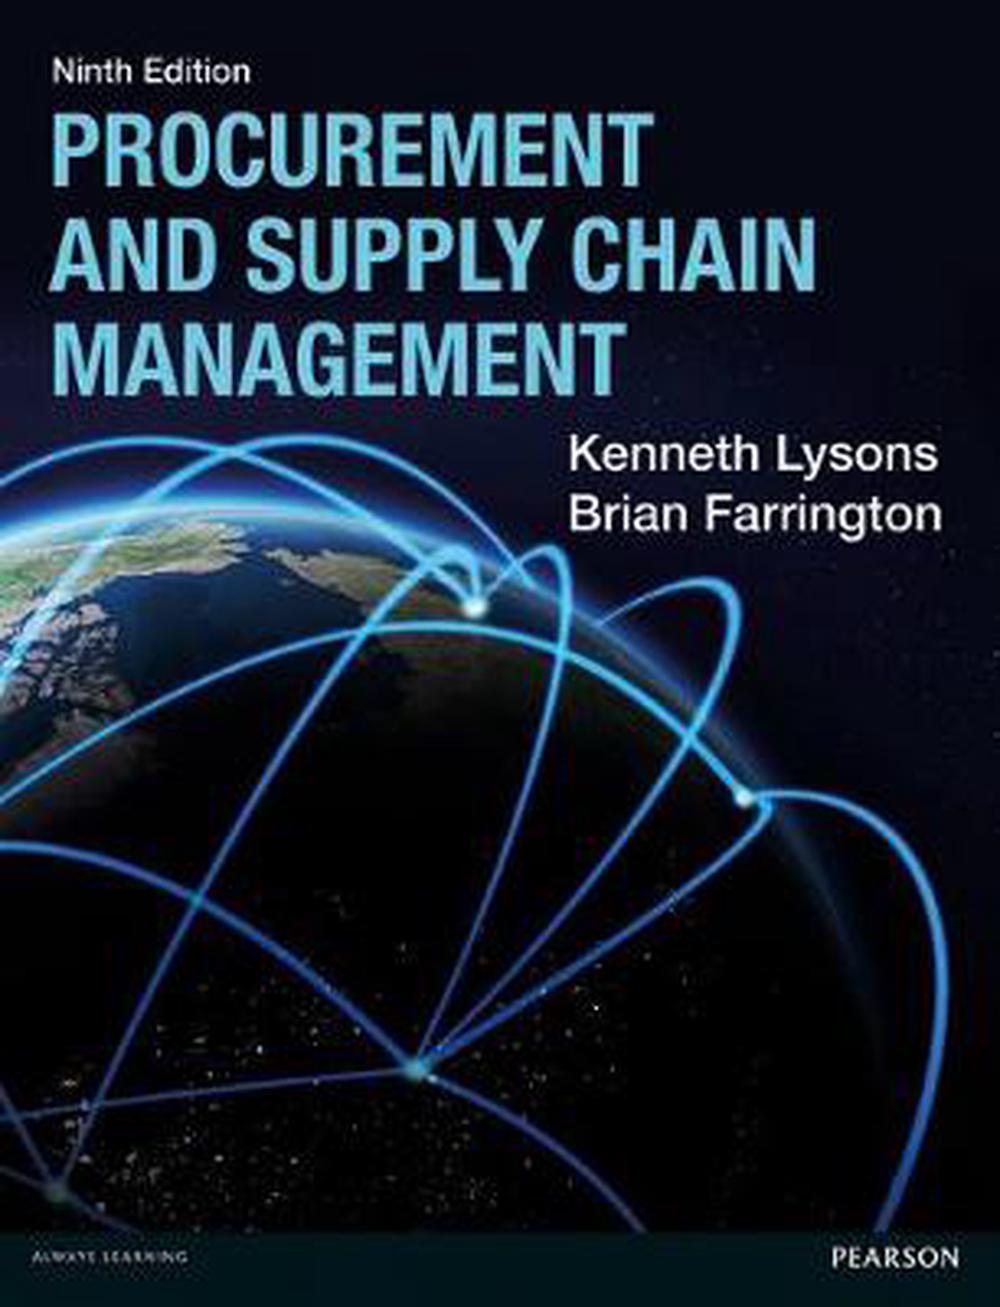 research papers on procurement and supply chain management